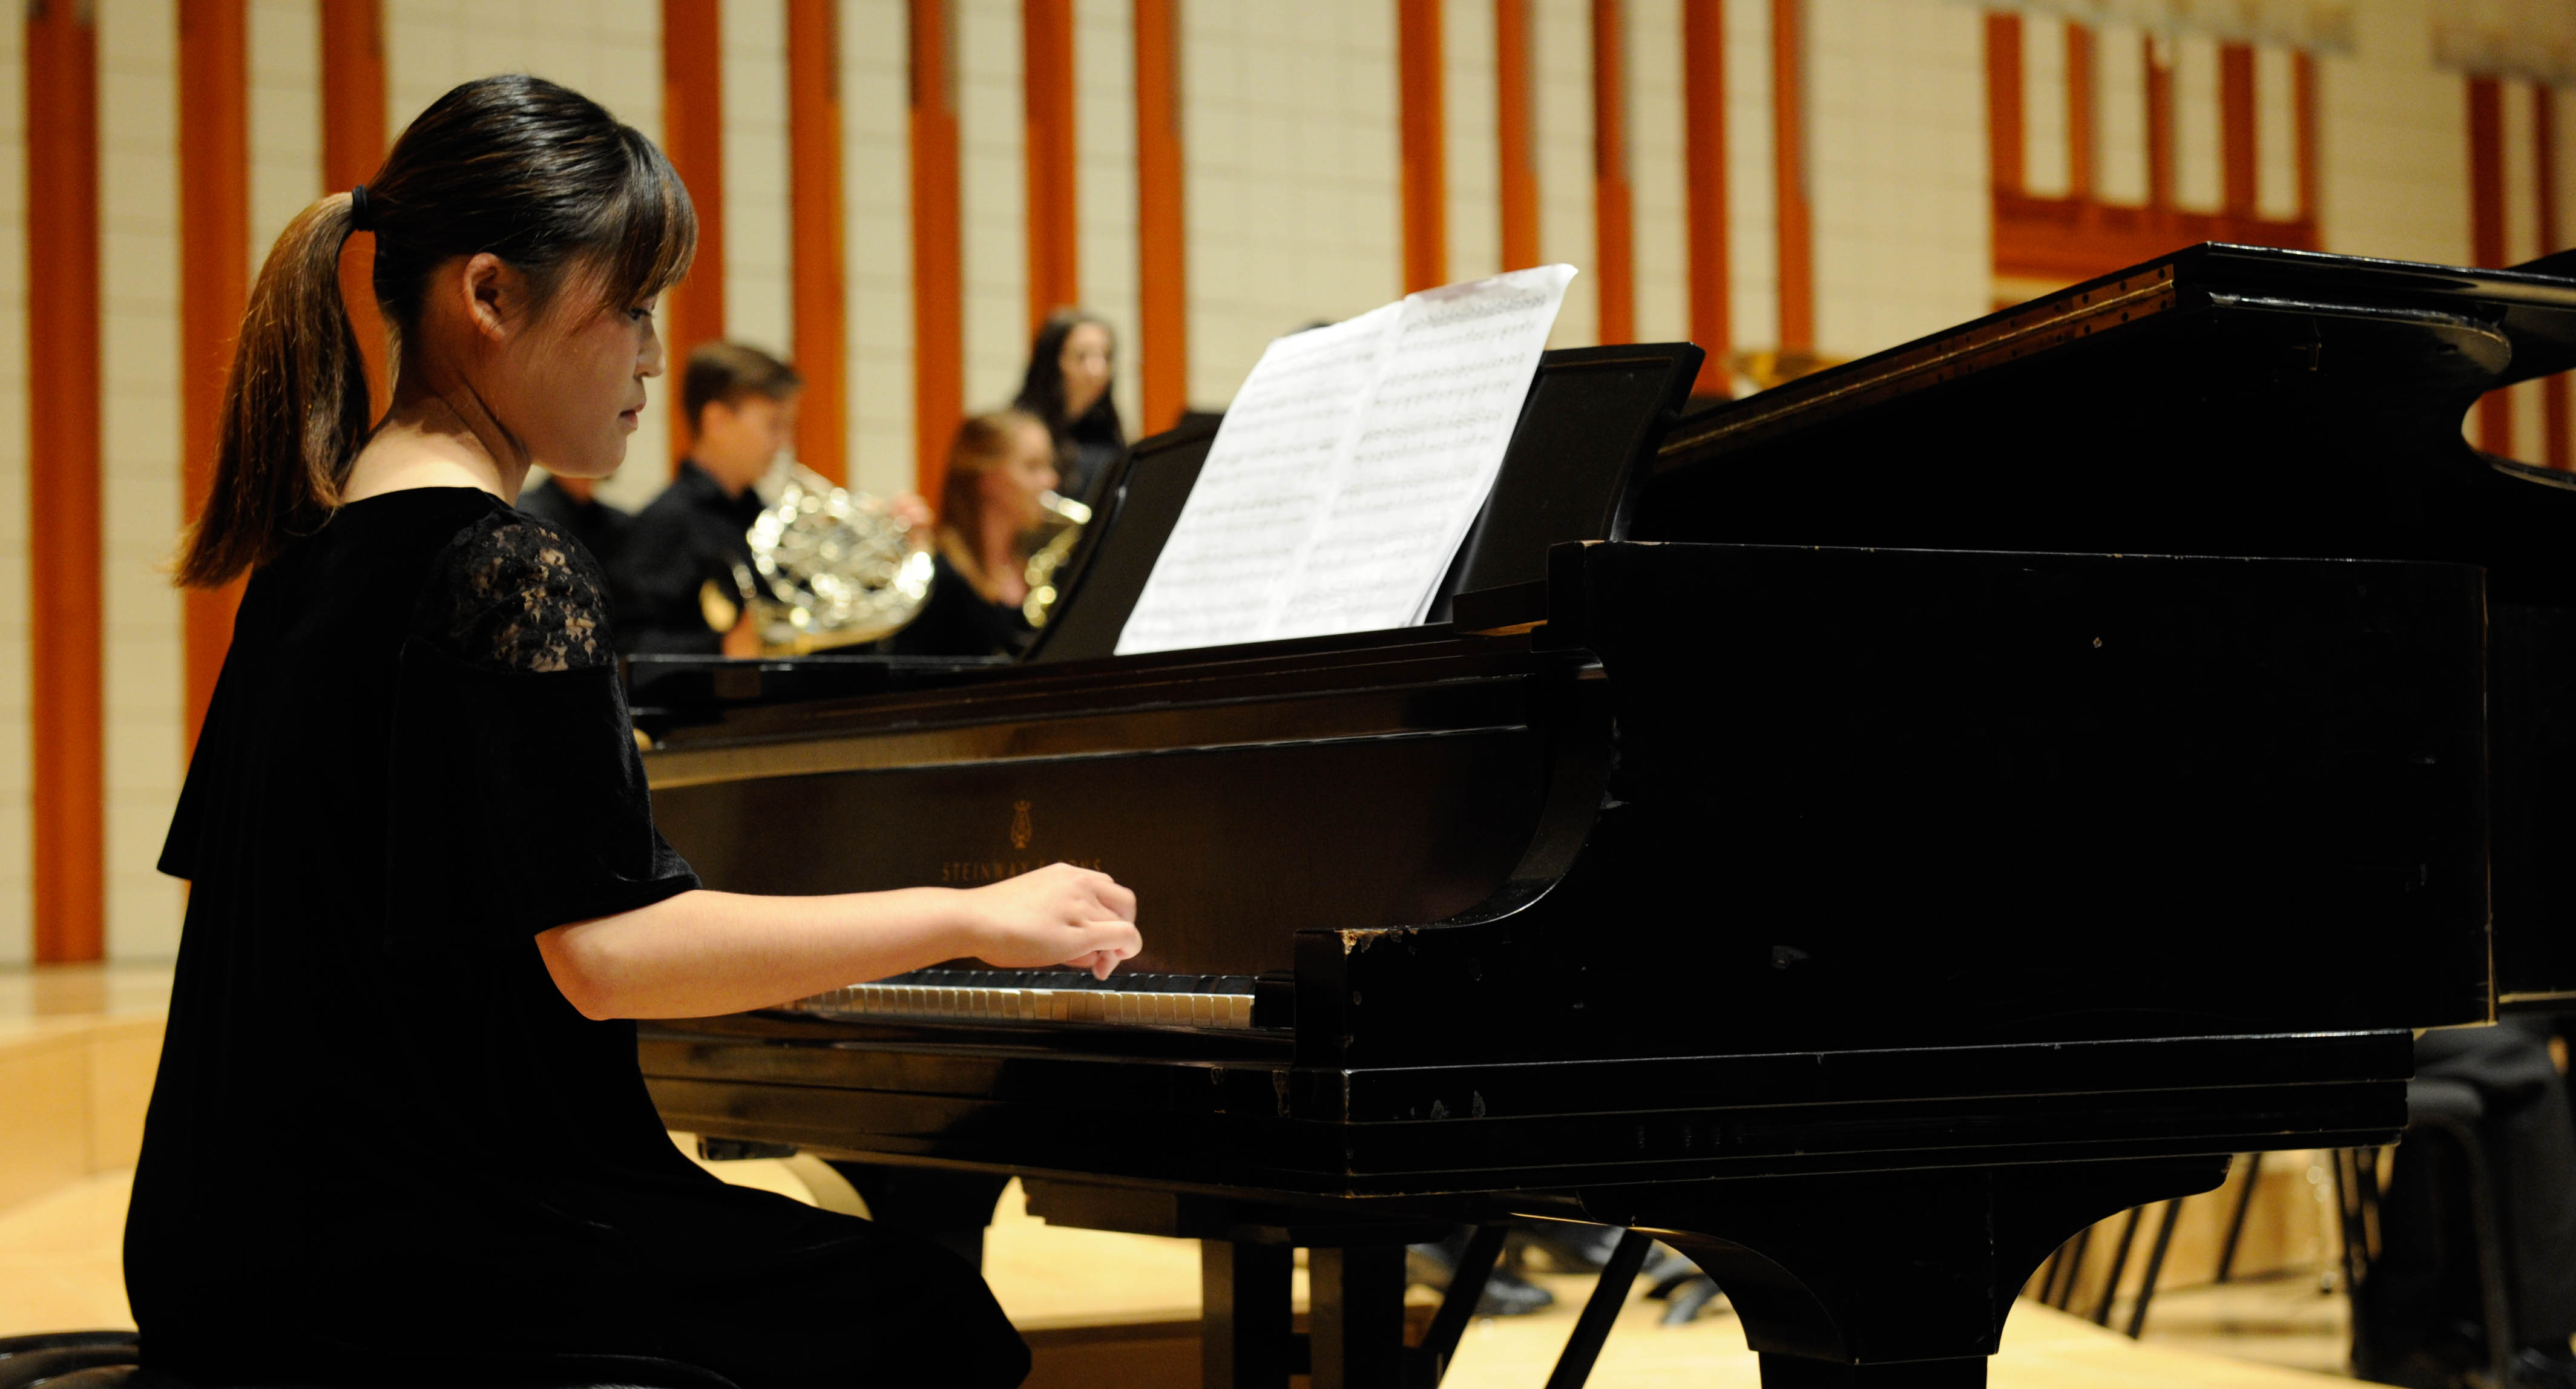 Pianist performing in a concerto setting